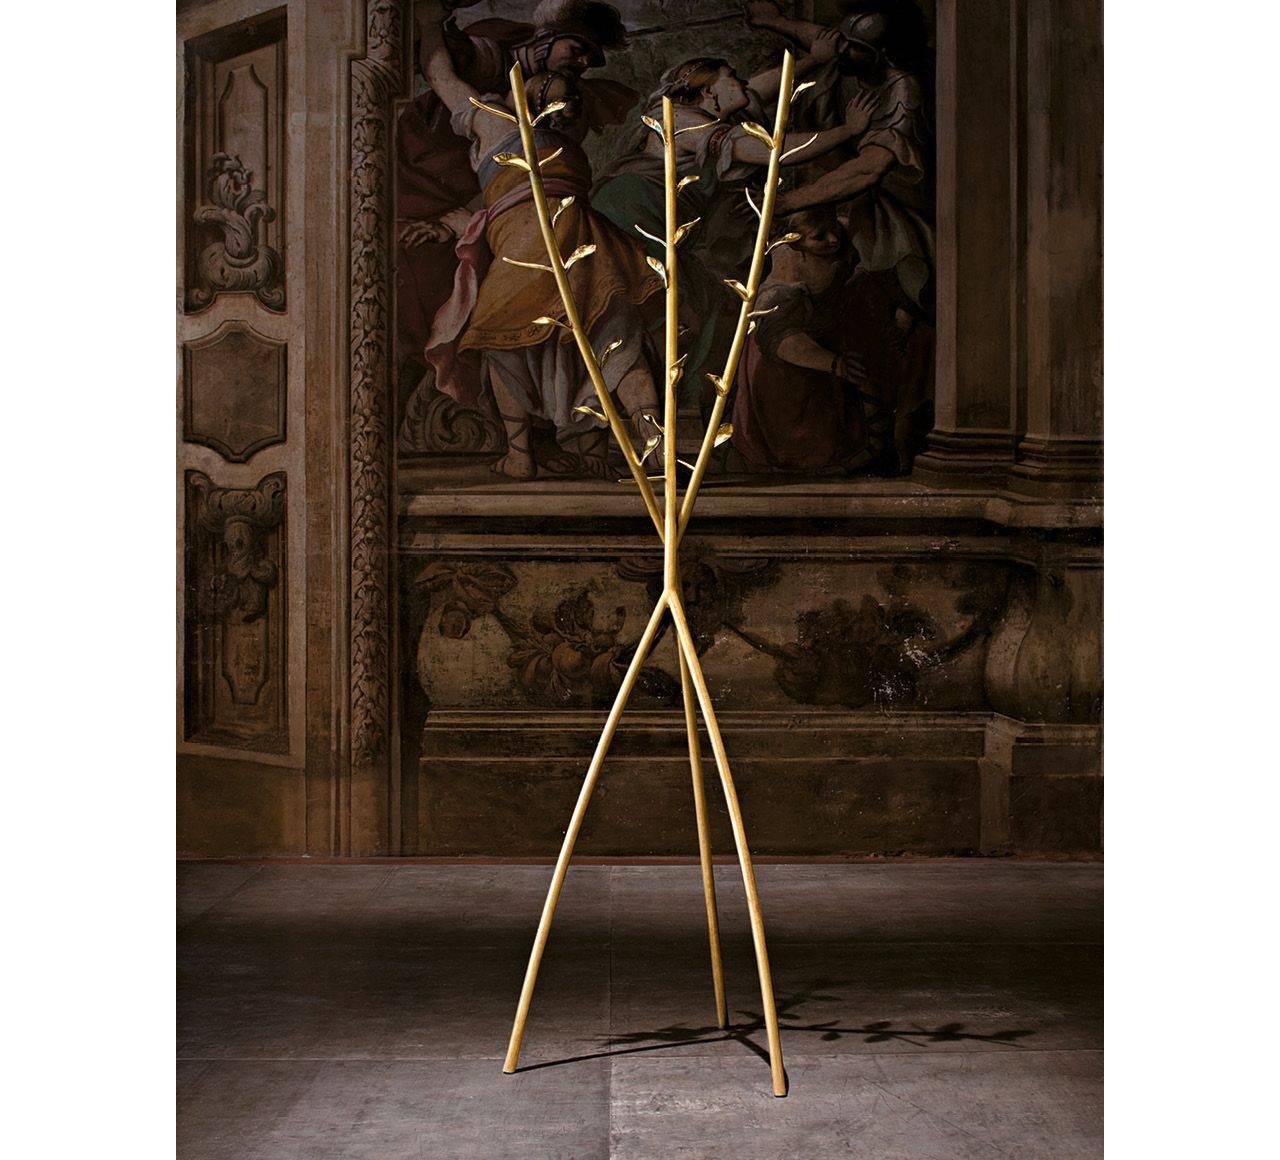 Borek Sipek gives us a poetic imitation of nature in this brass coat rack. Shoots become entangled as they rise to the sky.